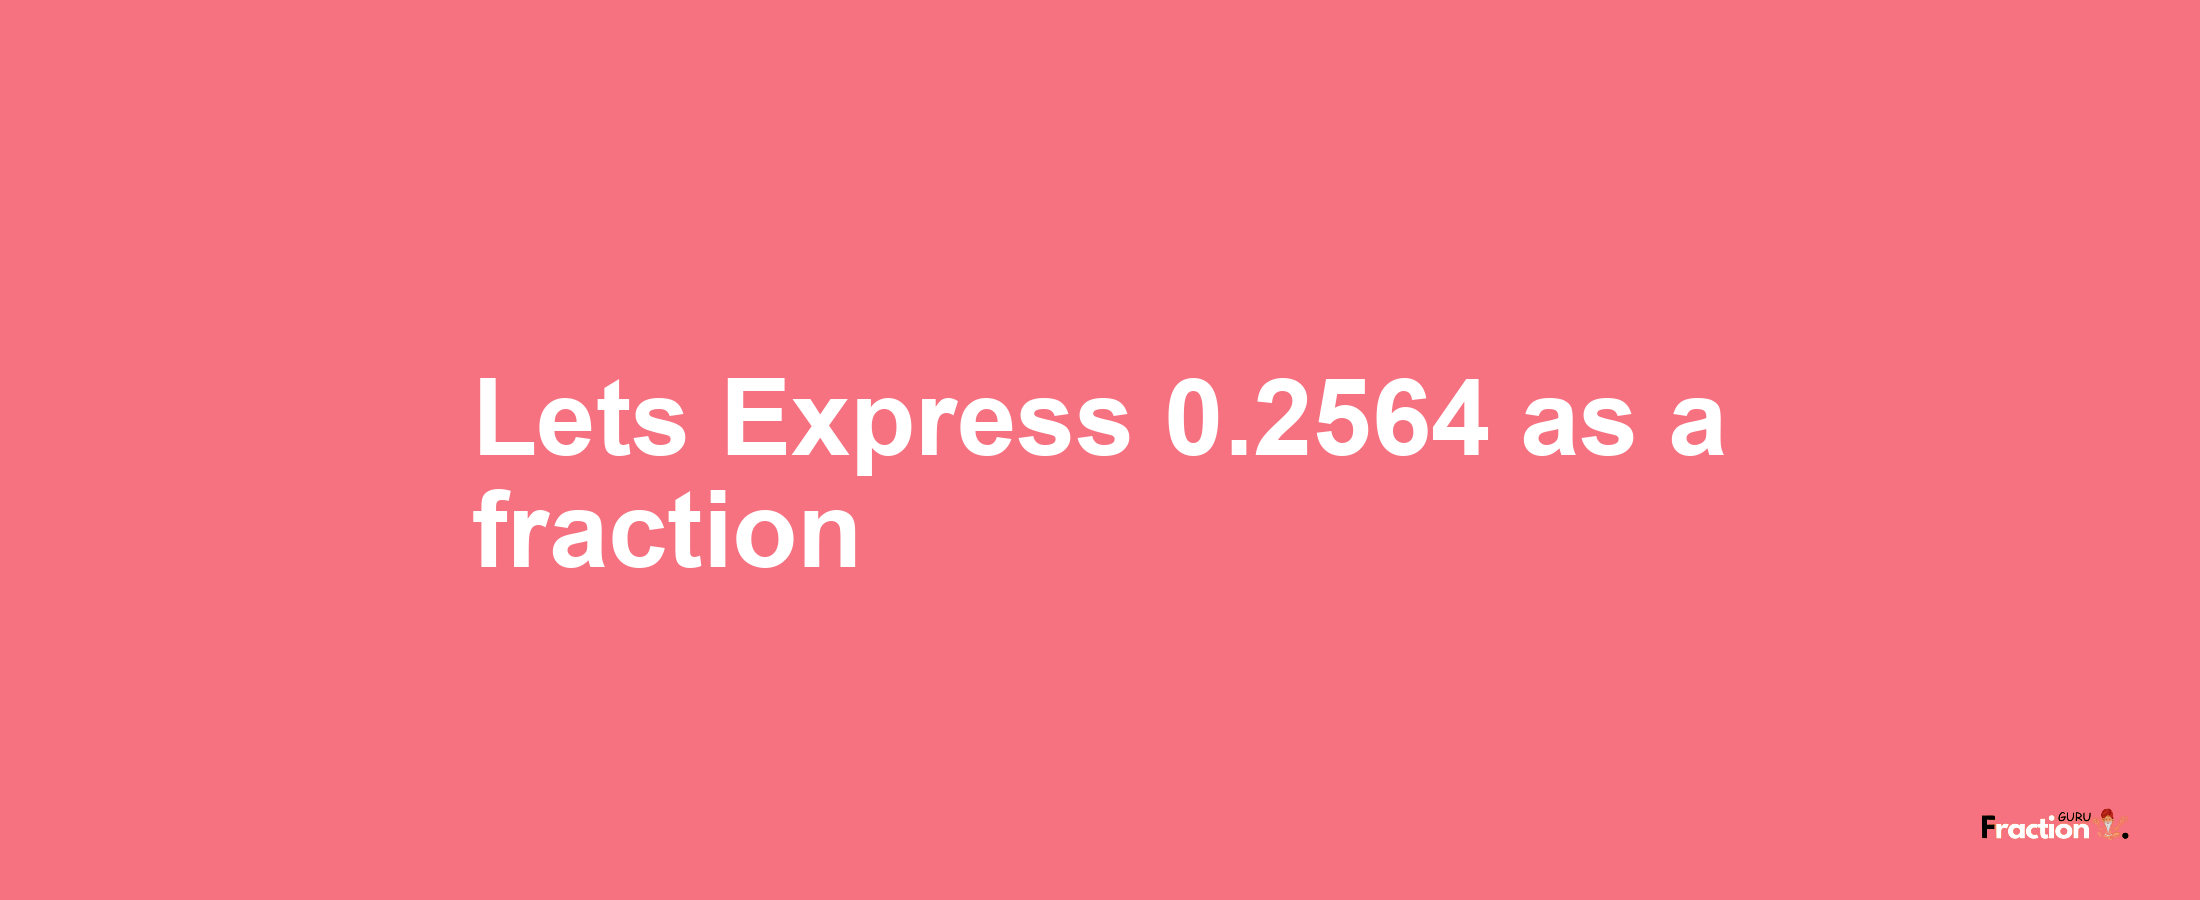 Lets Express 0.2564 as afraction